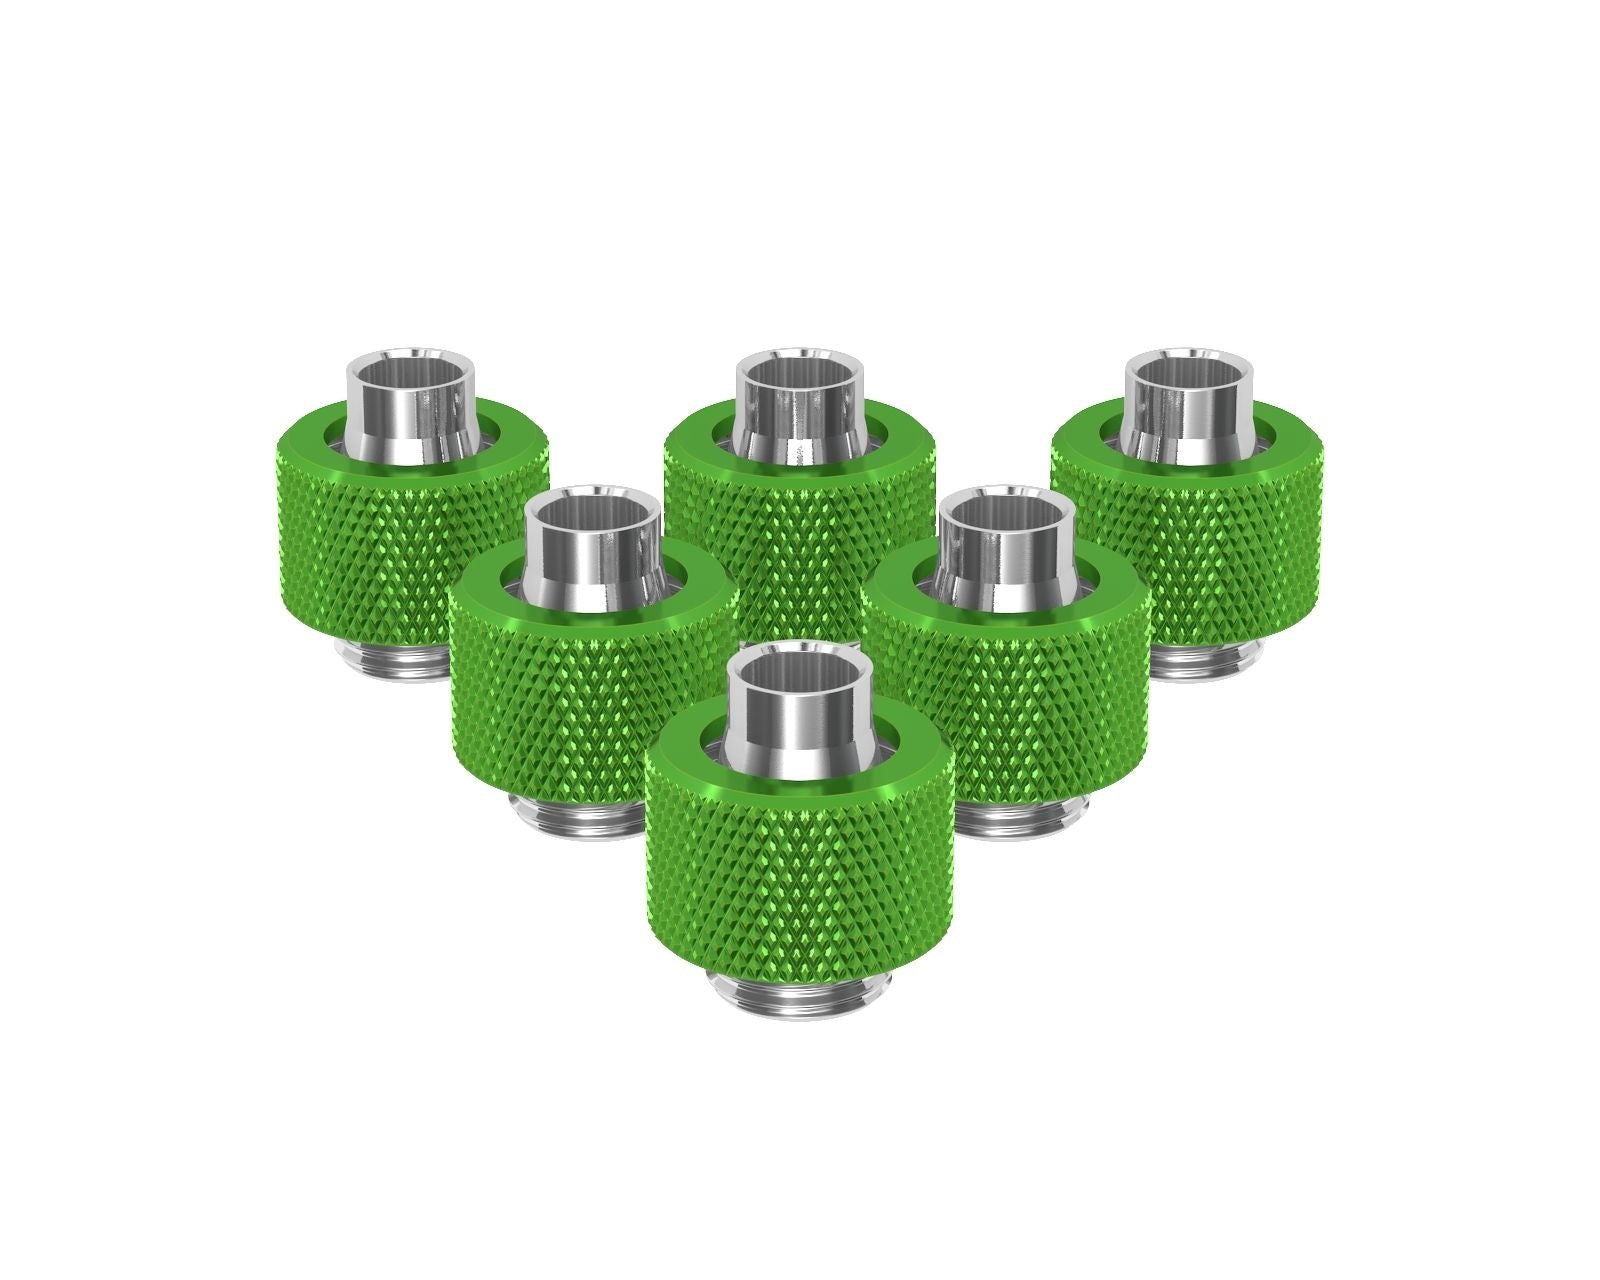 PrimoChill SecureFit SX - Premium Compression Fitting For 3/8in ID x 1/2in OD Flexible Tubing 6 Pack (F-SFSX12-6) - Available in 20+ Colors, Custom Watercooling Loop Ready - Toxic Candy